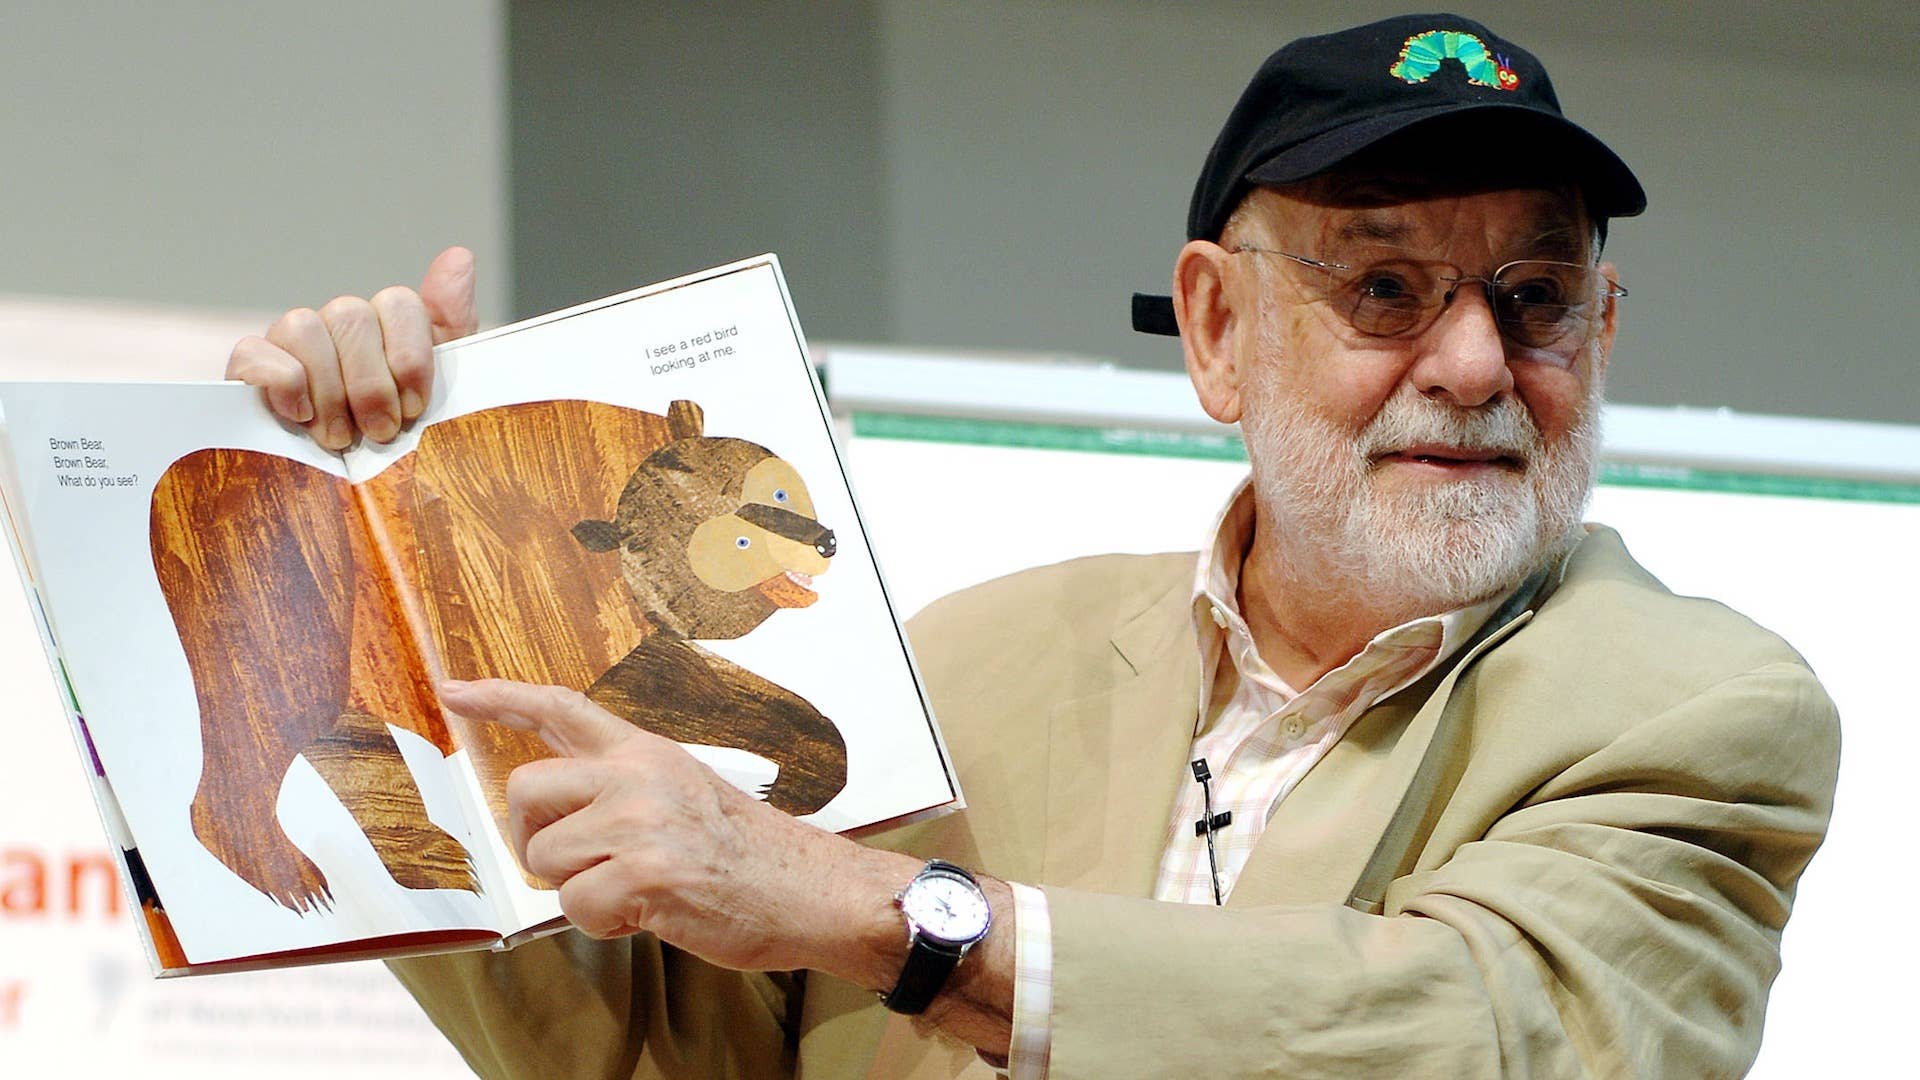 8-astounding-facts-about-eric-carle